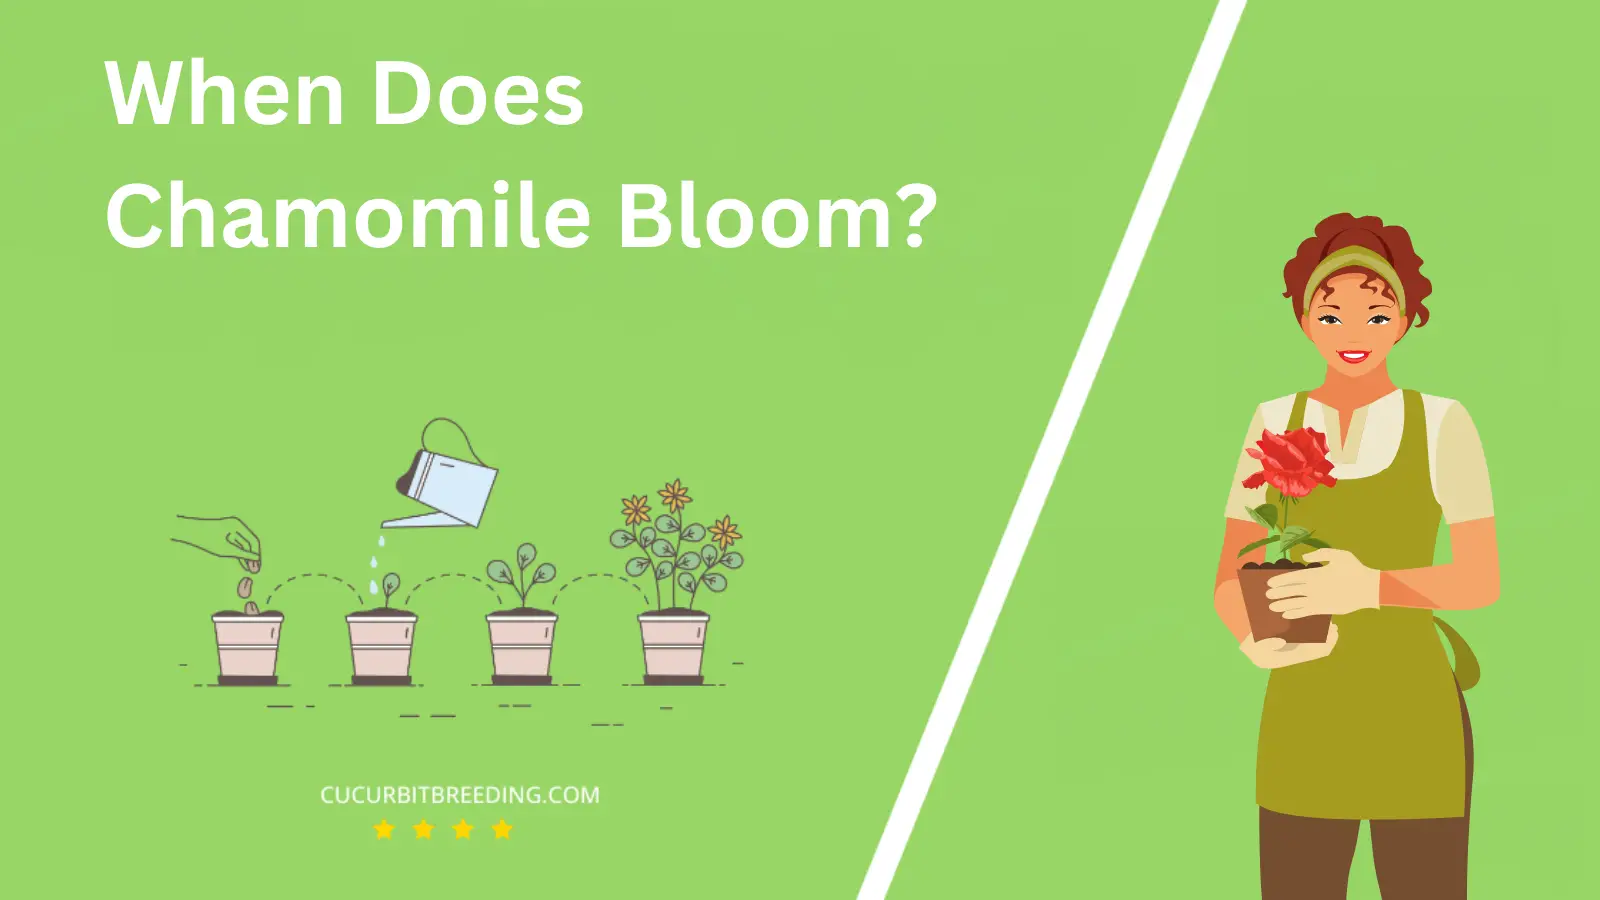 When Does Chamomile Bloom?